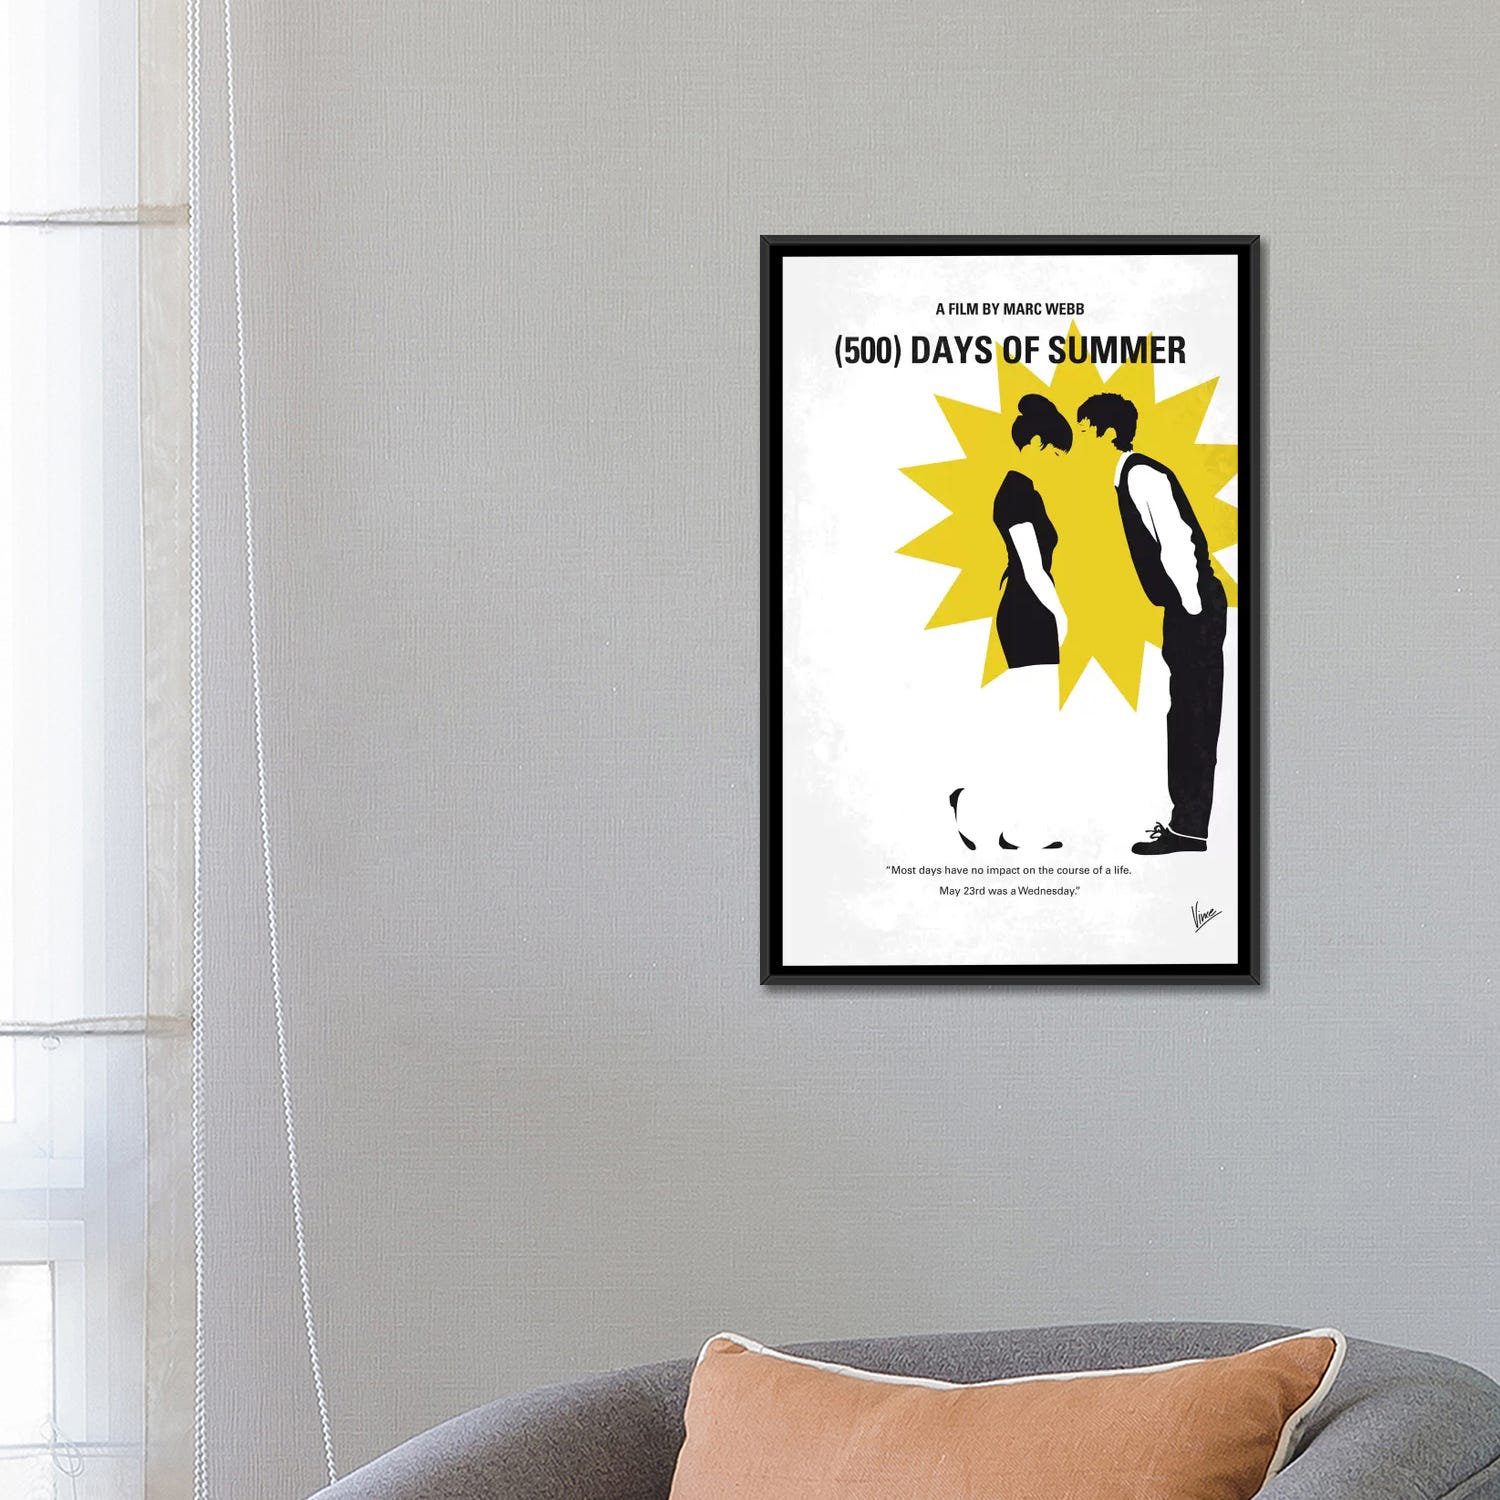 East Urban Home (500) Days of Summer Minimal Movie Poster Vintage Advertisement On Wrapped Canvas Size: 26 H x 18 W x 1.5 D